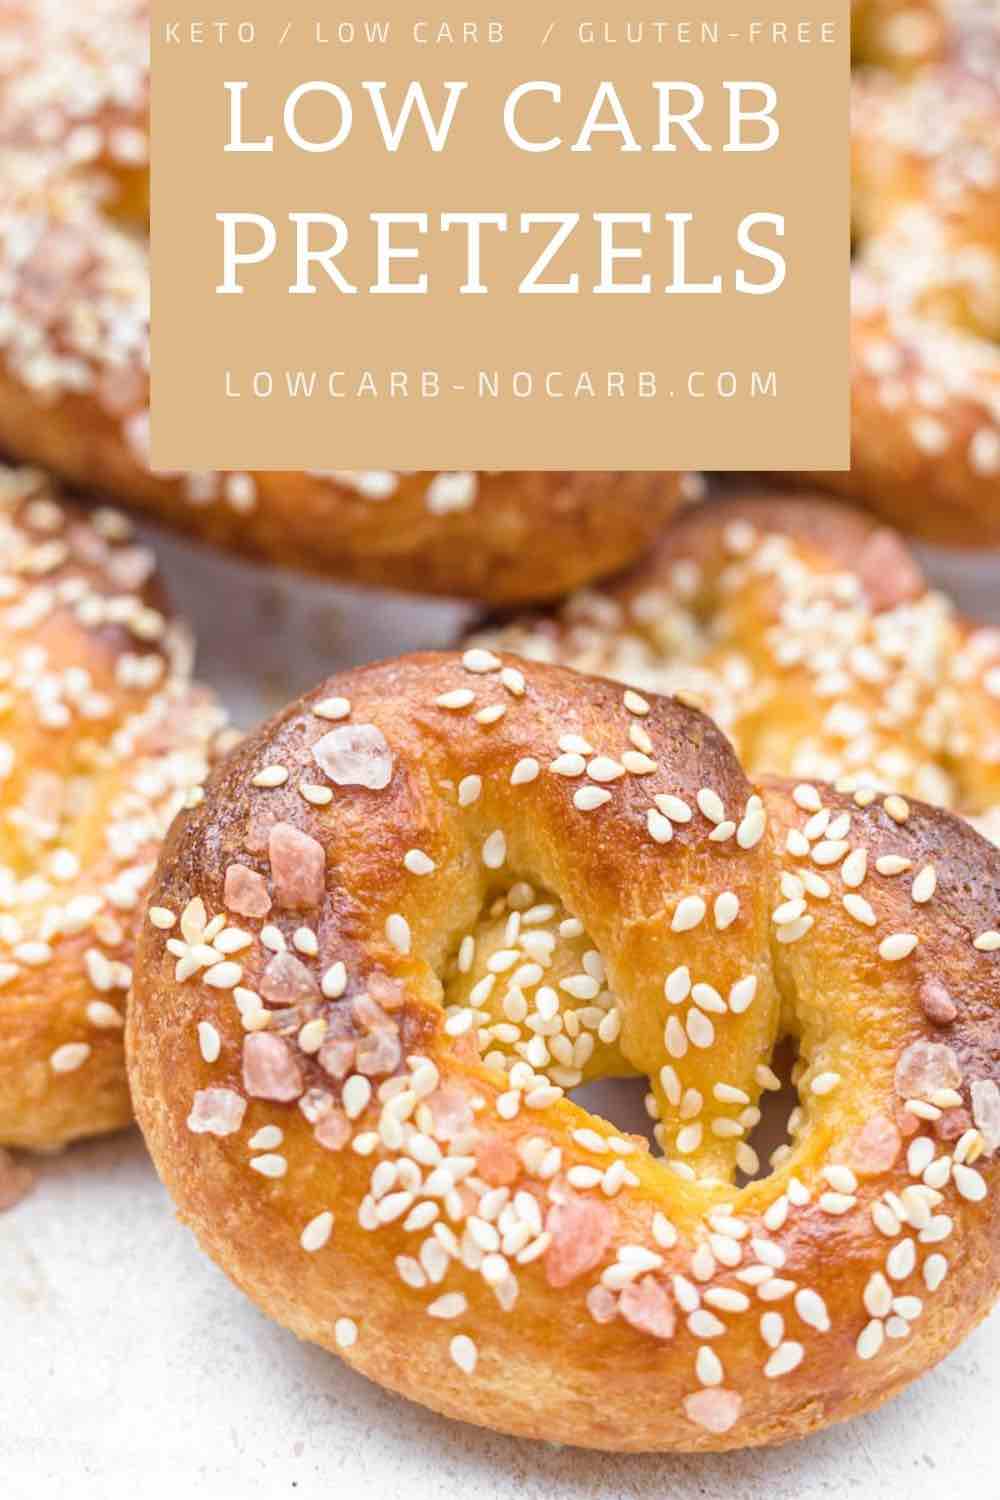 Keto Pretzels baked on a table.